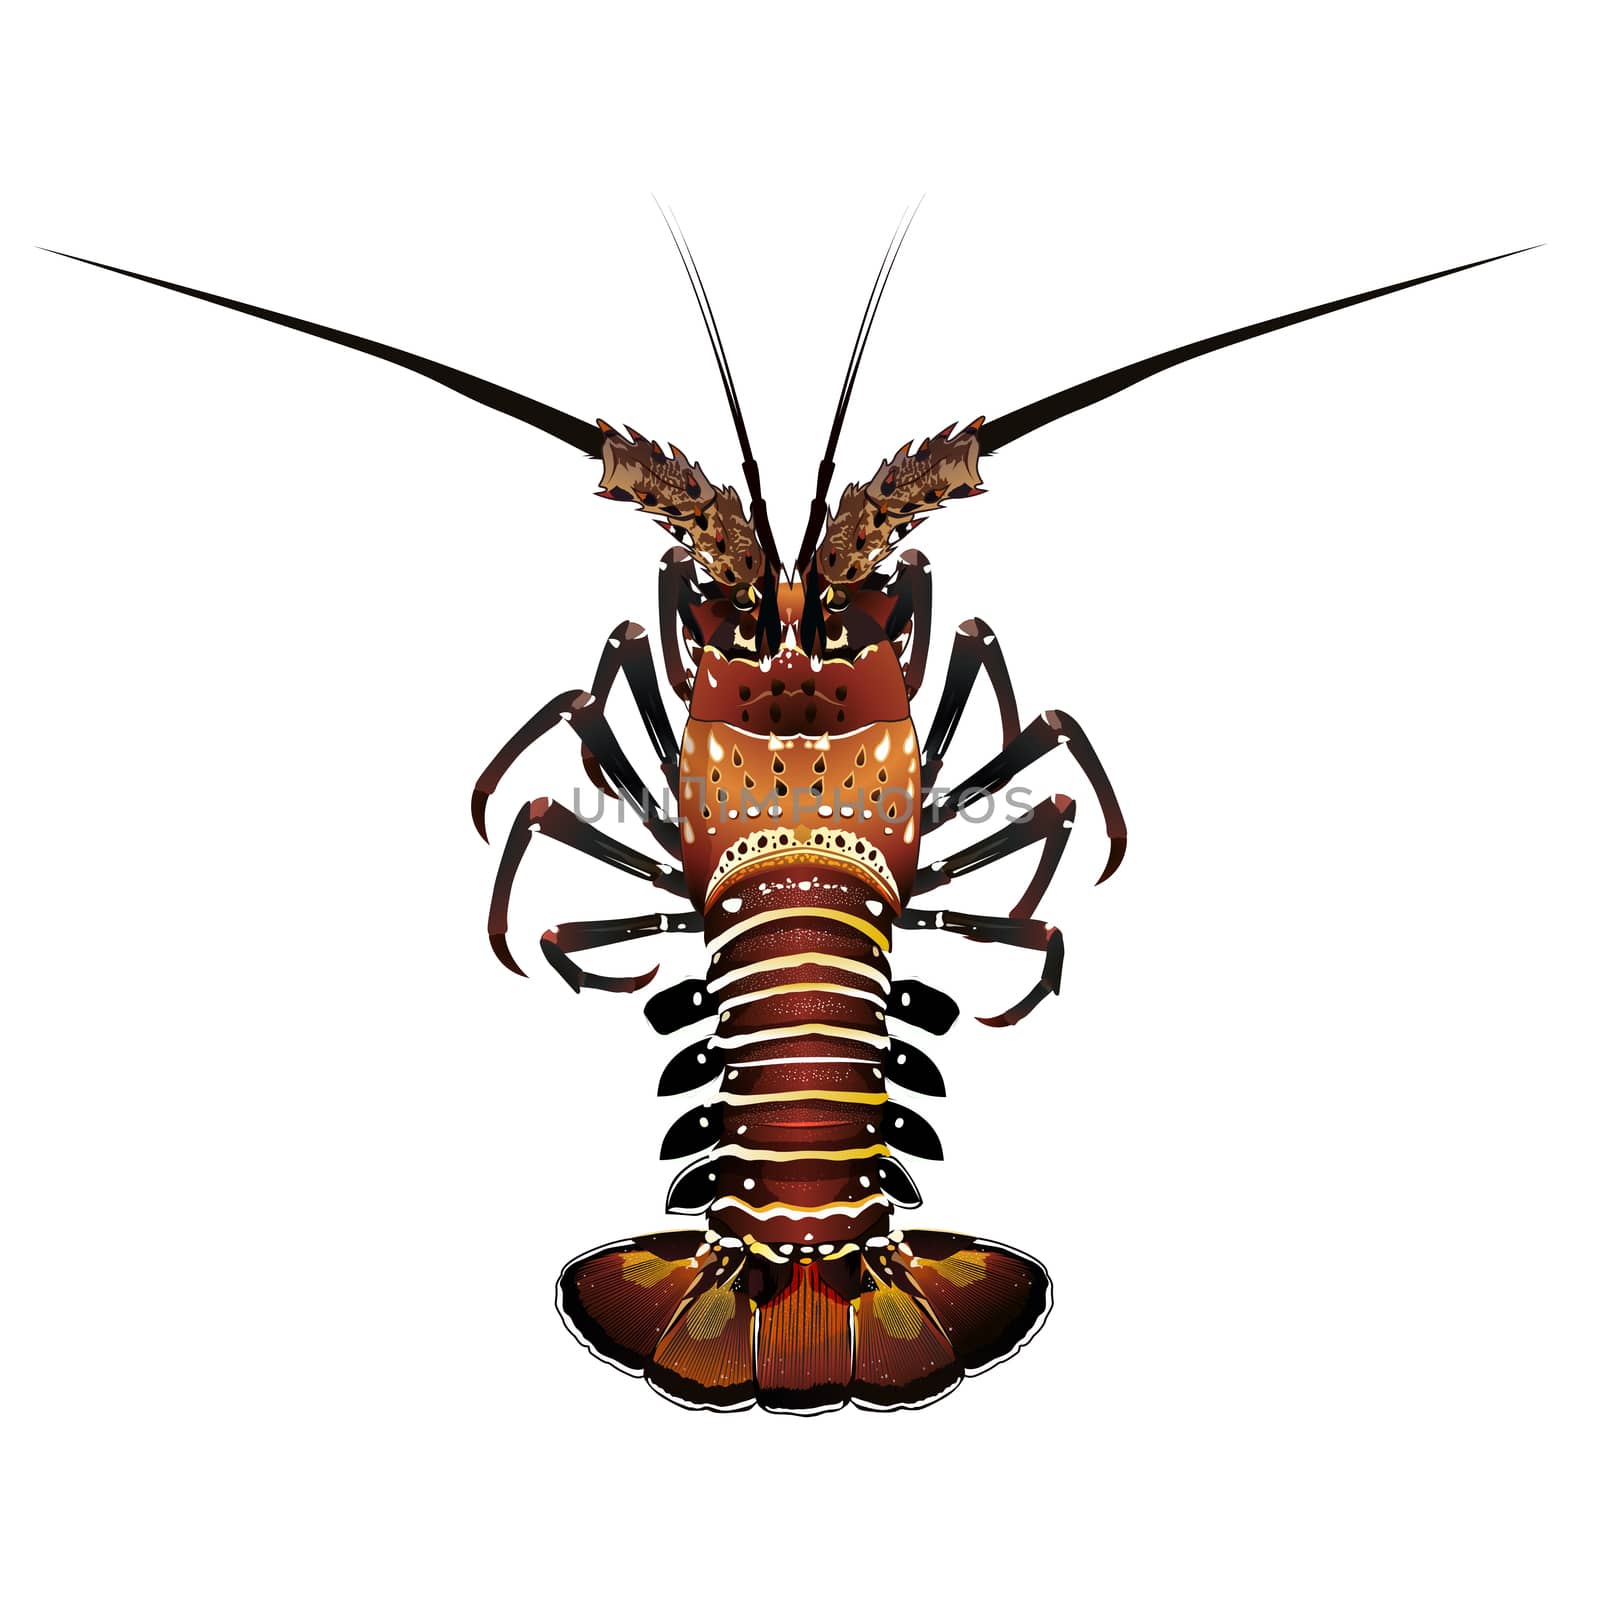 Spiny Lobster, Isolated Illustration by ConceptCafe